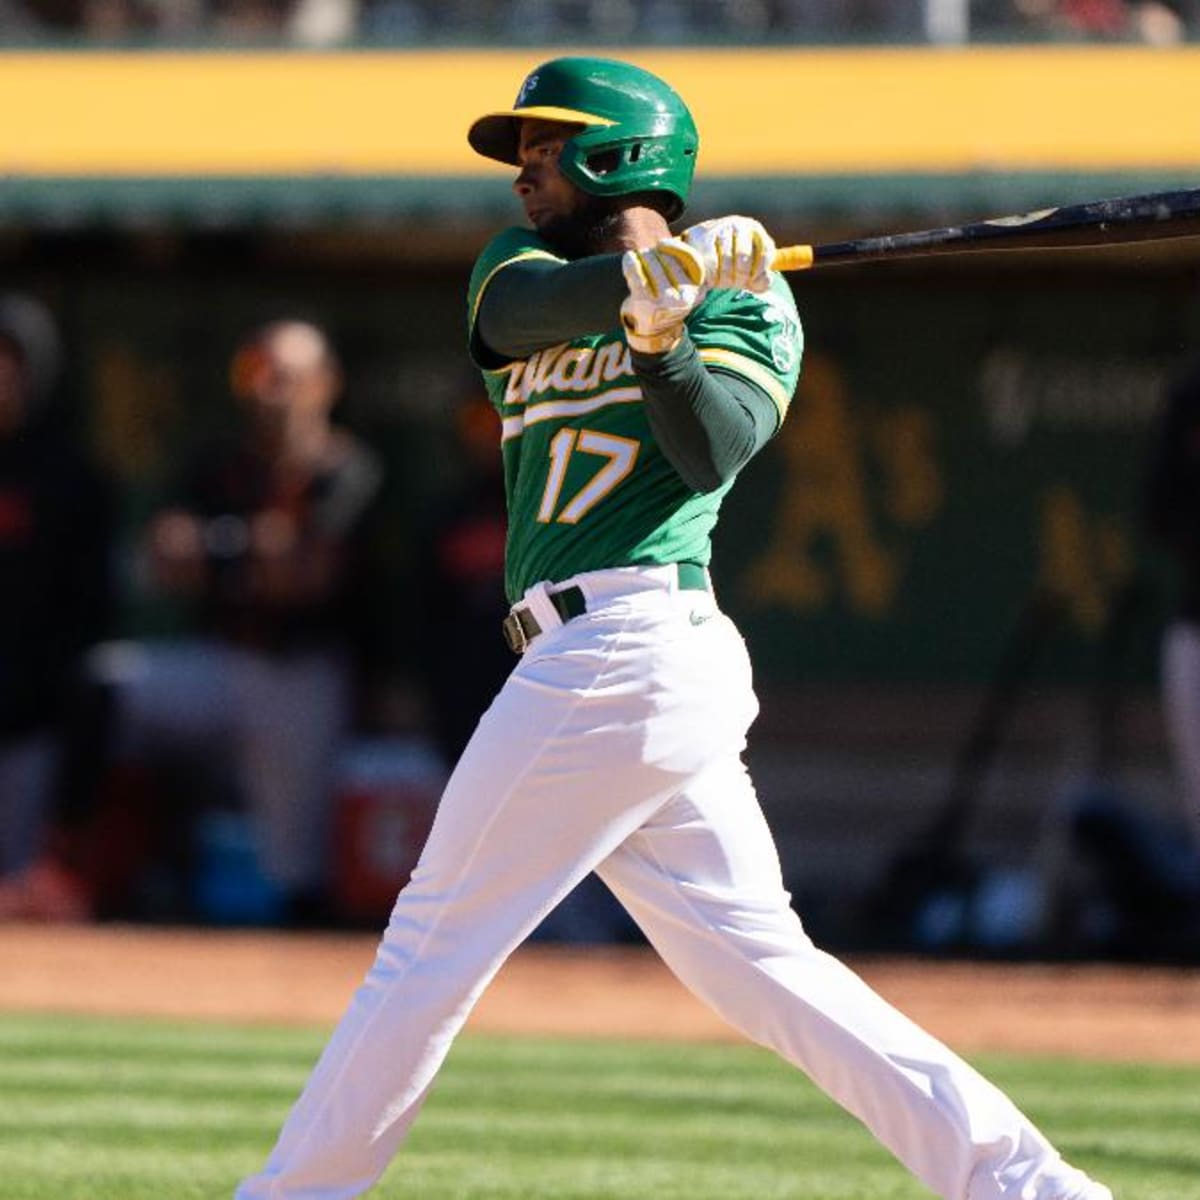 Red Sox acquire utility player Pablo Reyes from Oakland Athletics